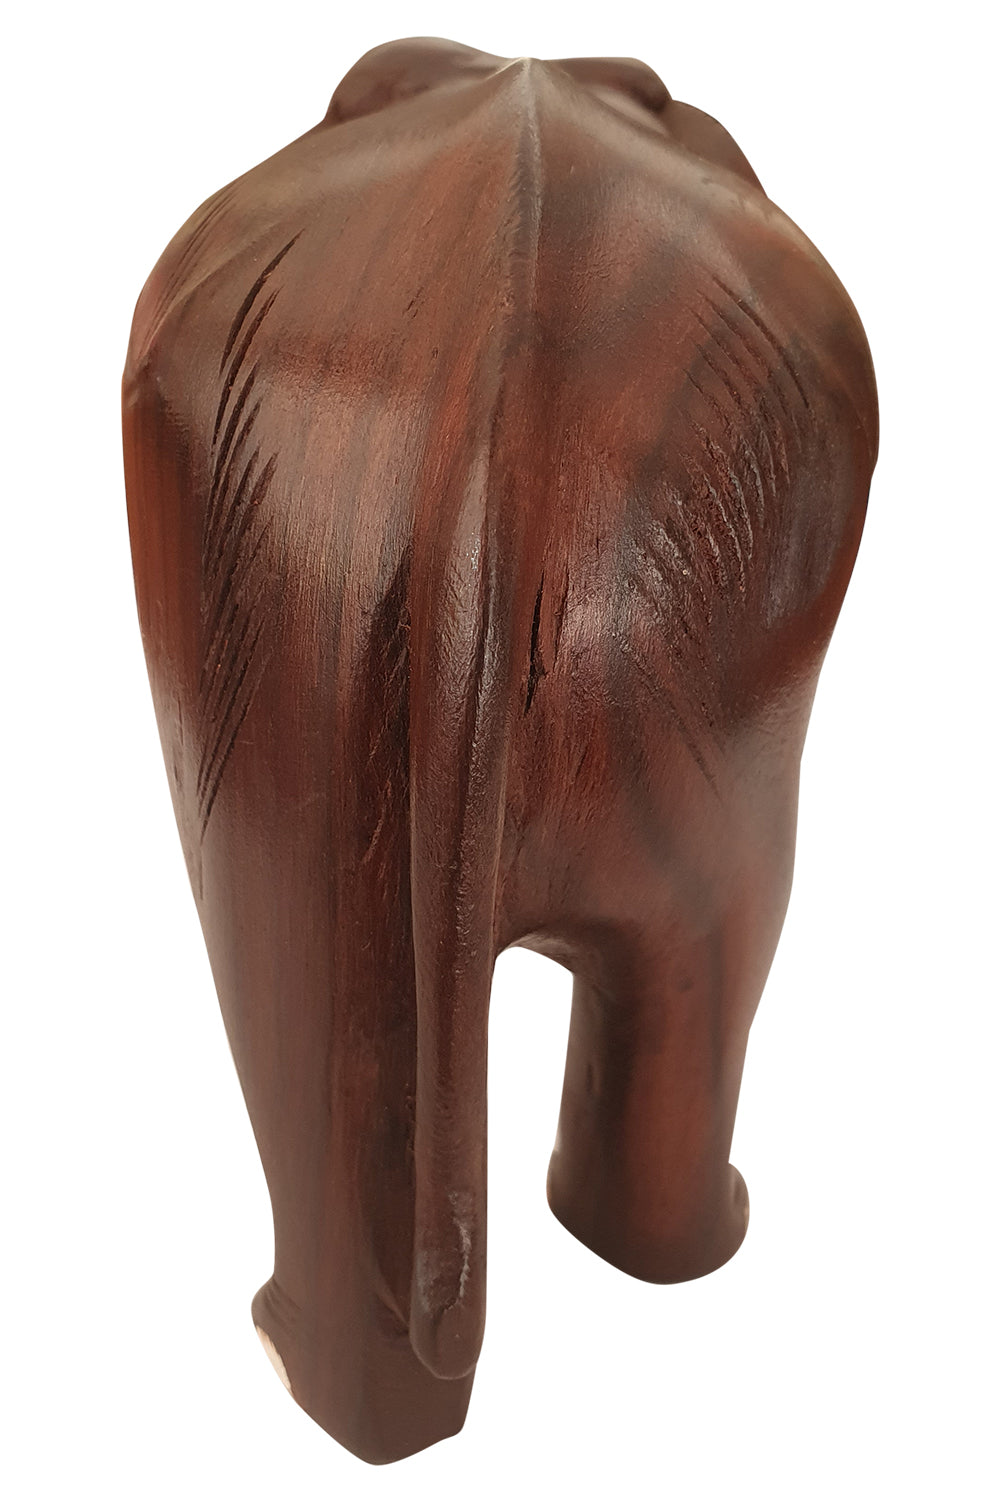 Southloom Handmade Elephant Handicraft (Carved from Rose Wood) 5 Inches